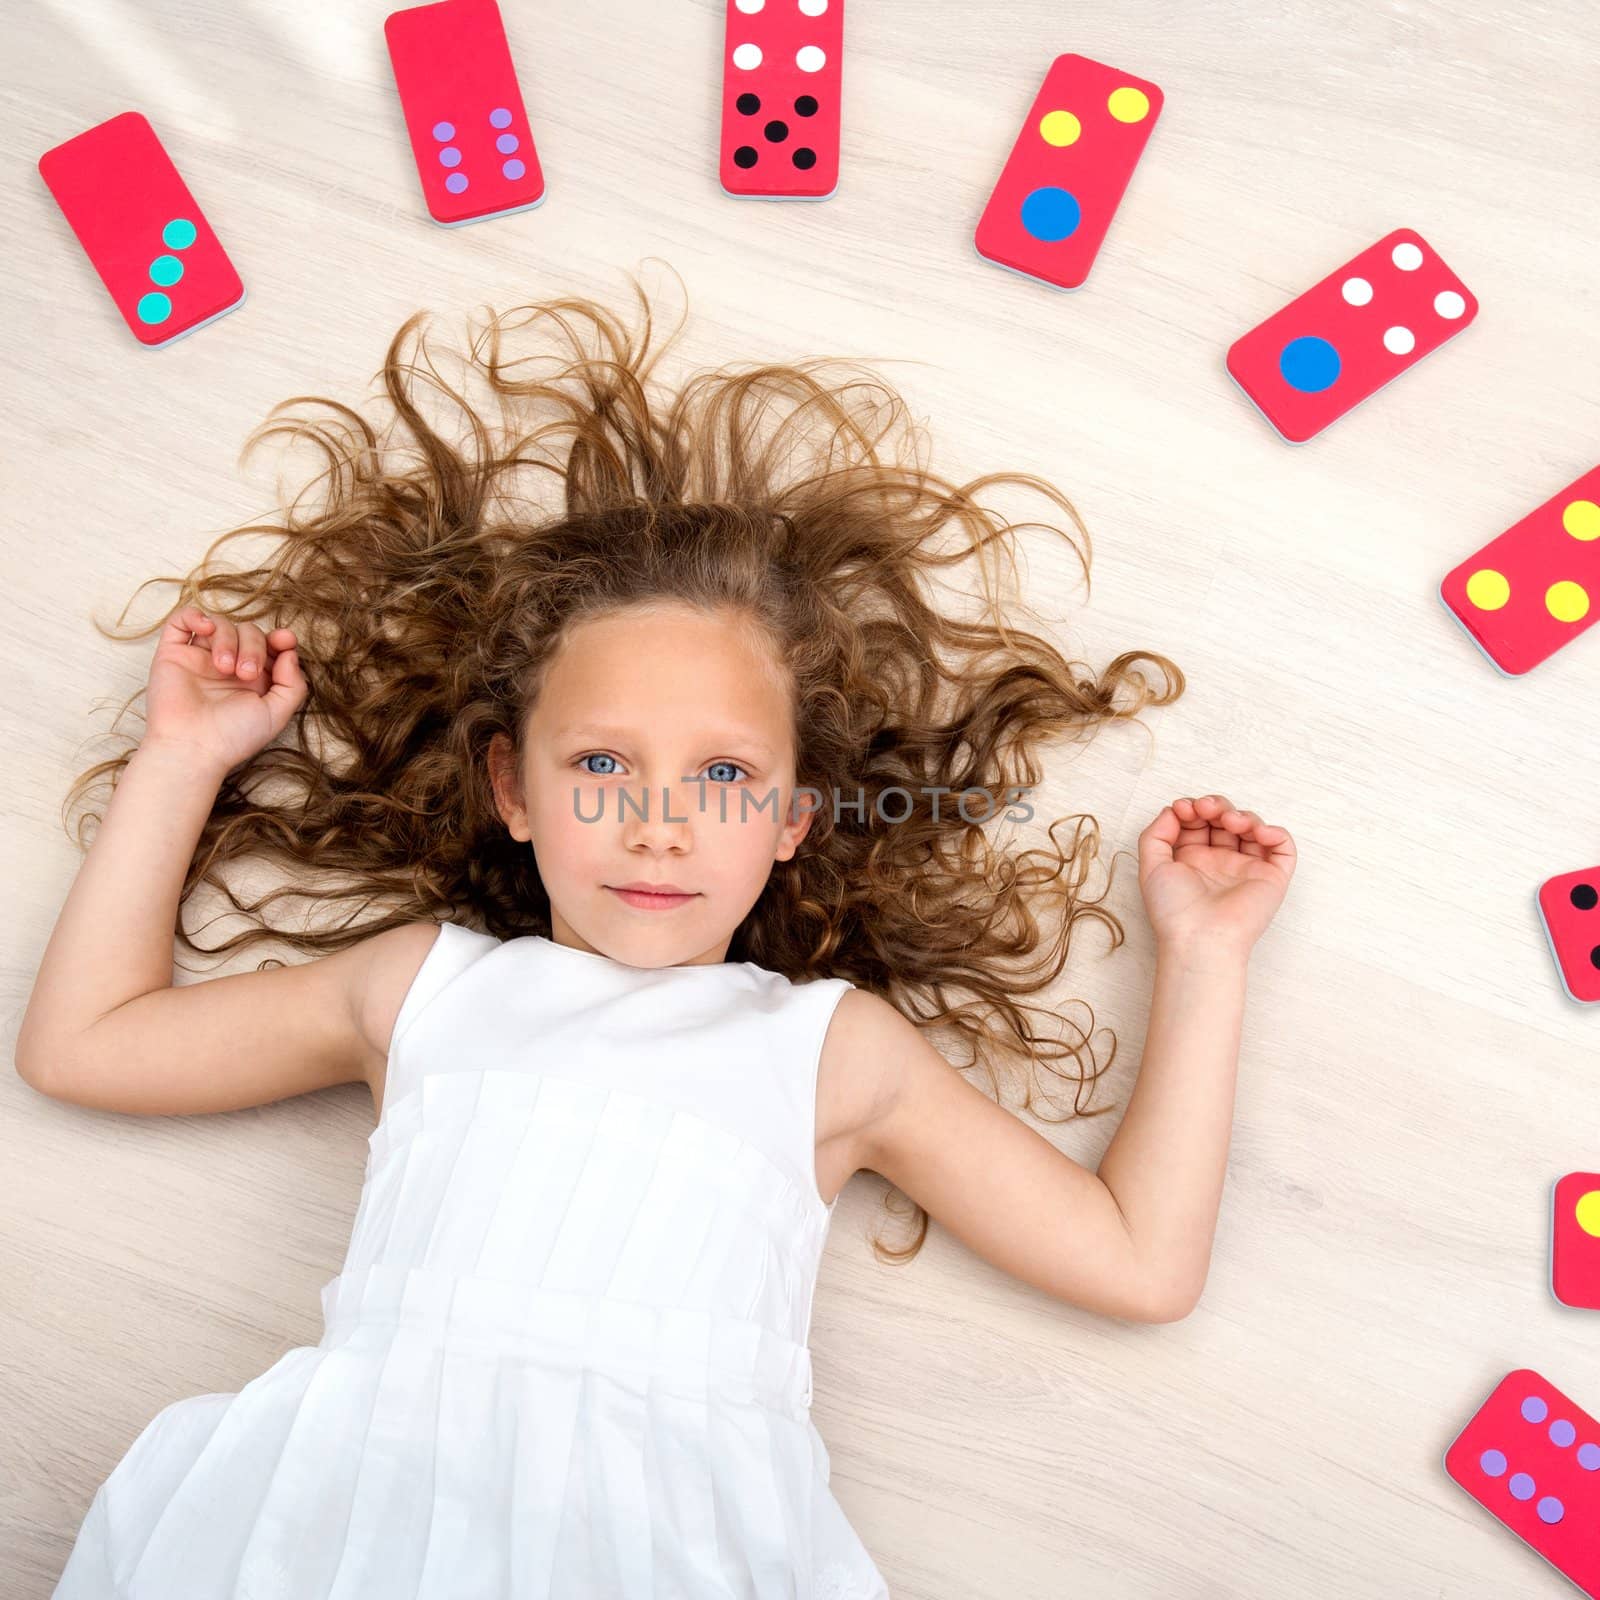 Young girl on floor with domino pieces by karelnoppe